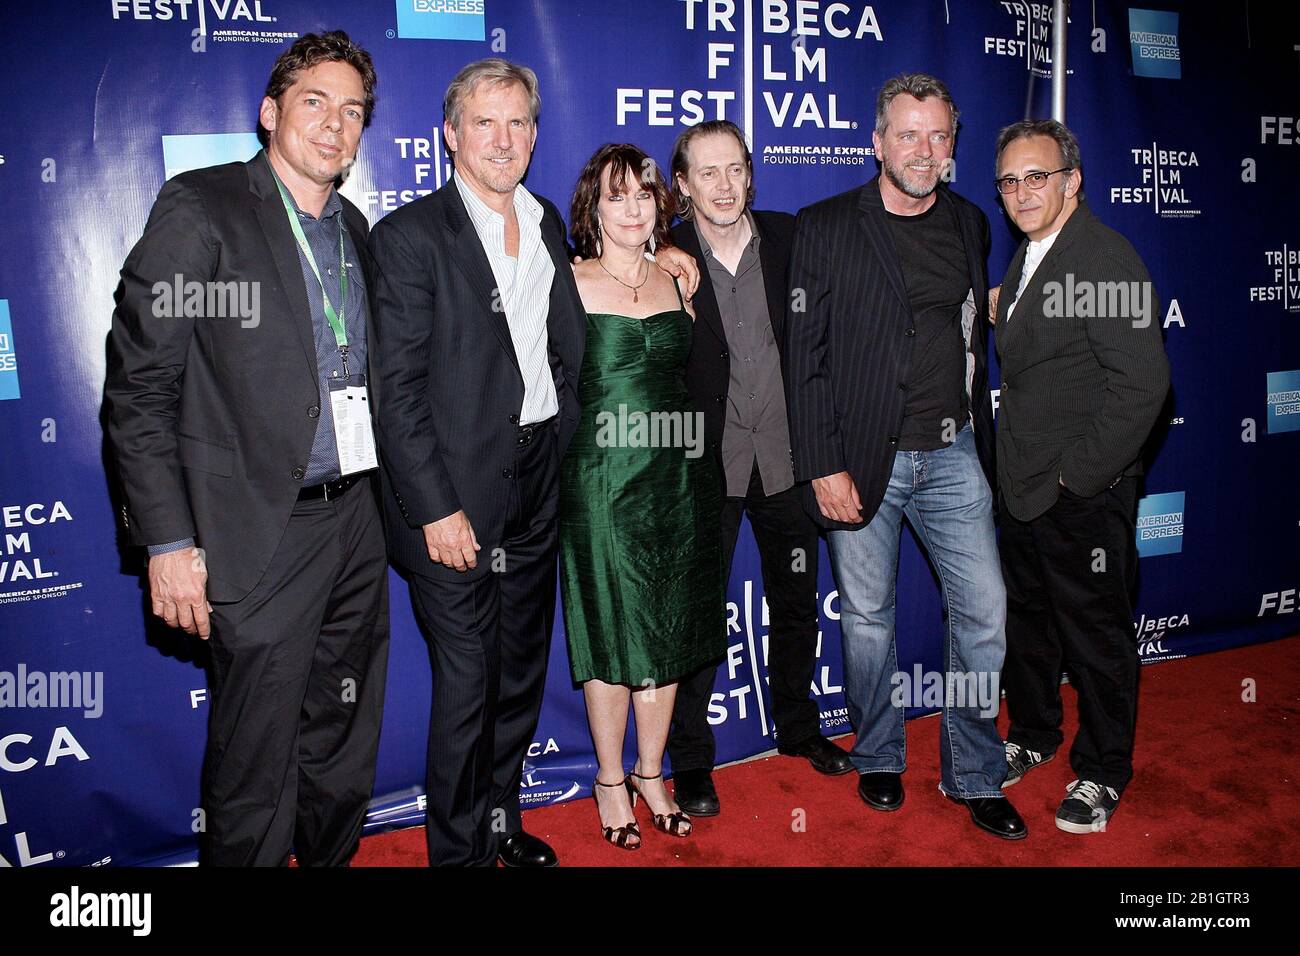 New York, NY, USA. 25 April, 2009. Producer, Fred Berner, actor, Jamey Sheridan, director, Bette Gordon, Steve Buscemi, Aidan Quinn, Jamin O'Brien at the premiere of 'Handsome Harry' during the 8th Annual Tribeca Film Festival at the SVA Theater. Credit: Steve Mack/Alamy Stock Photo